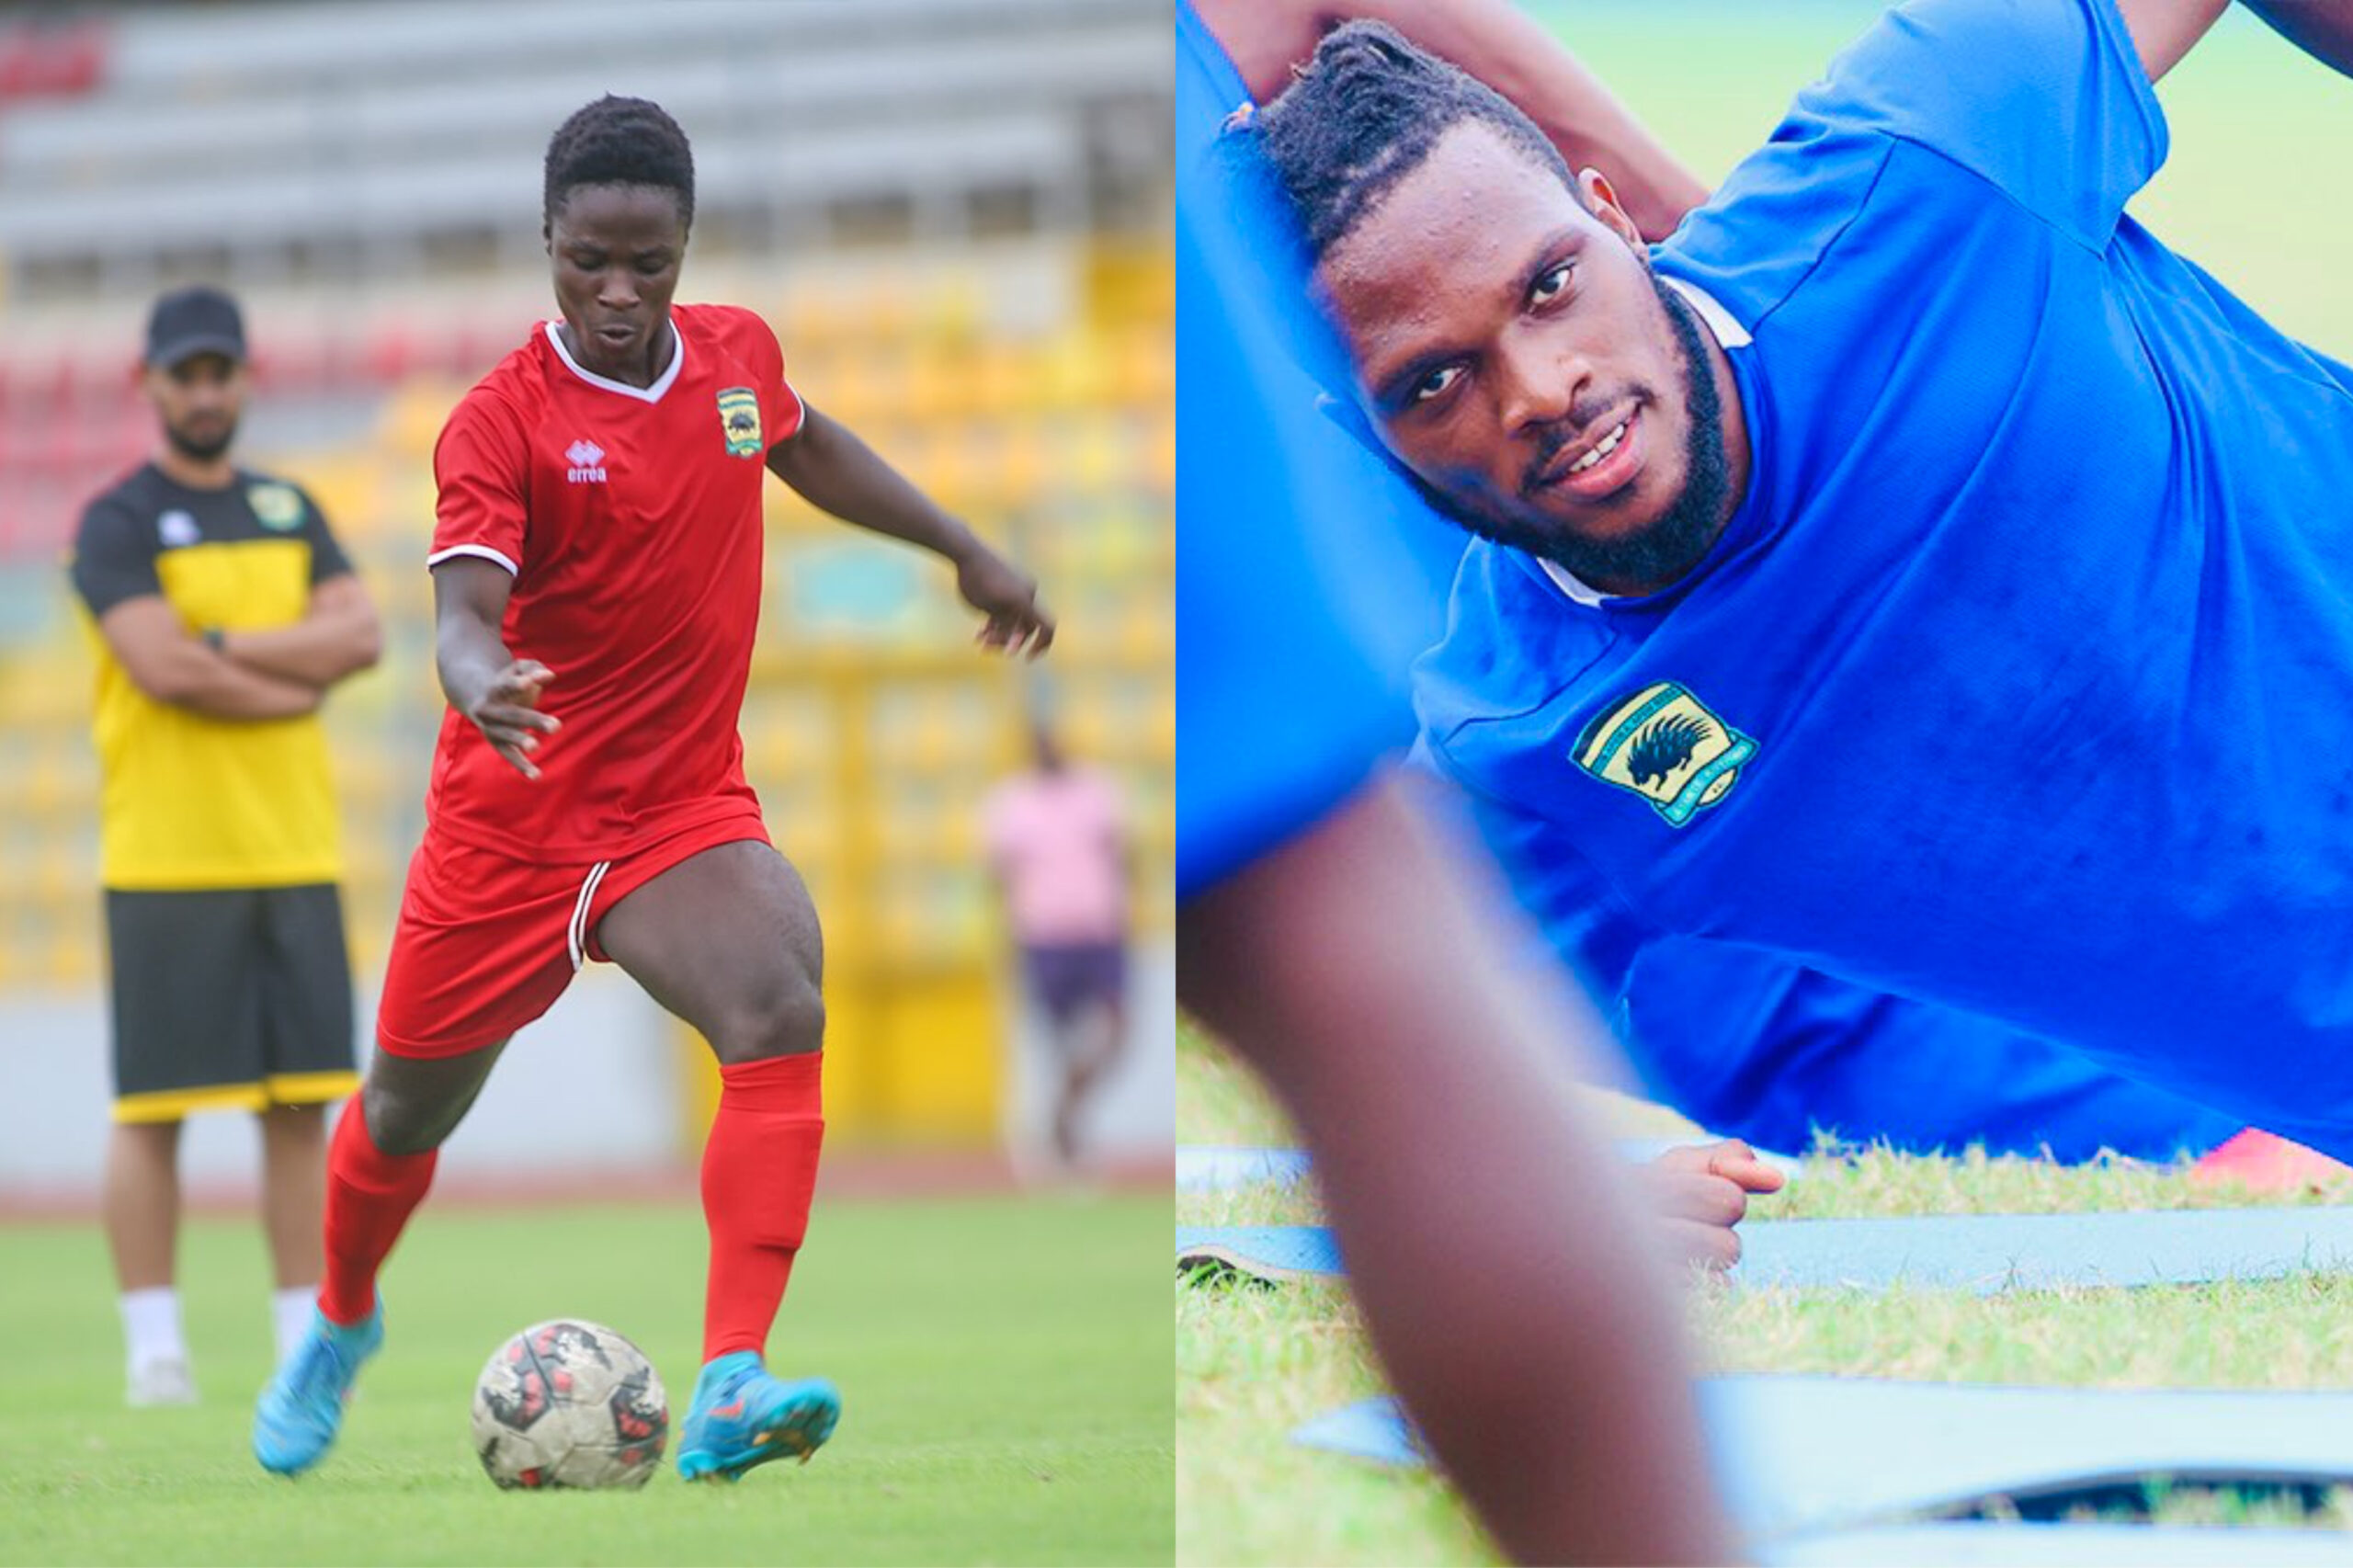 Rocky Dwamena and Steven Mukwala available for selection ahead of Asante Kotoko’s trip to GoldStars